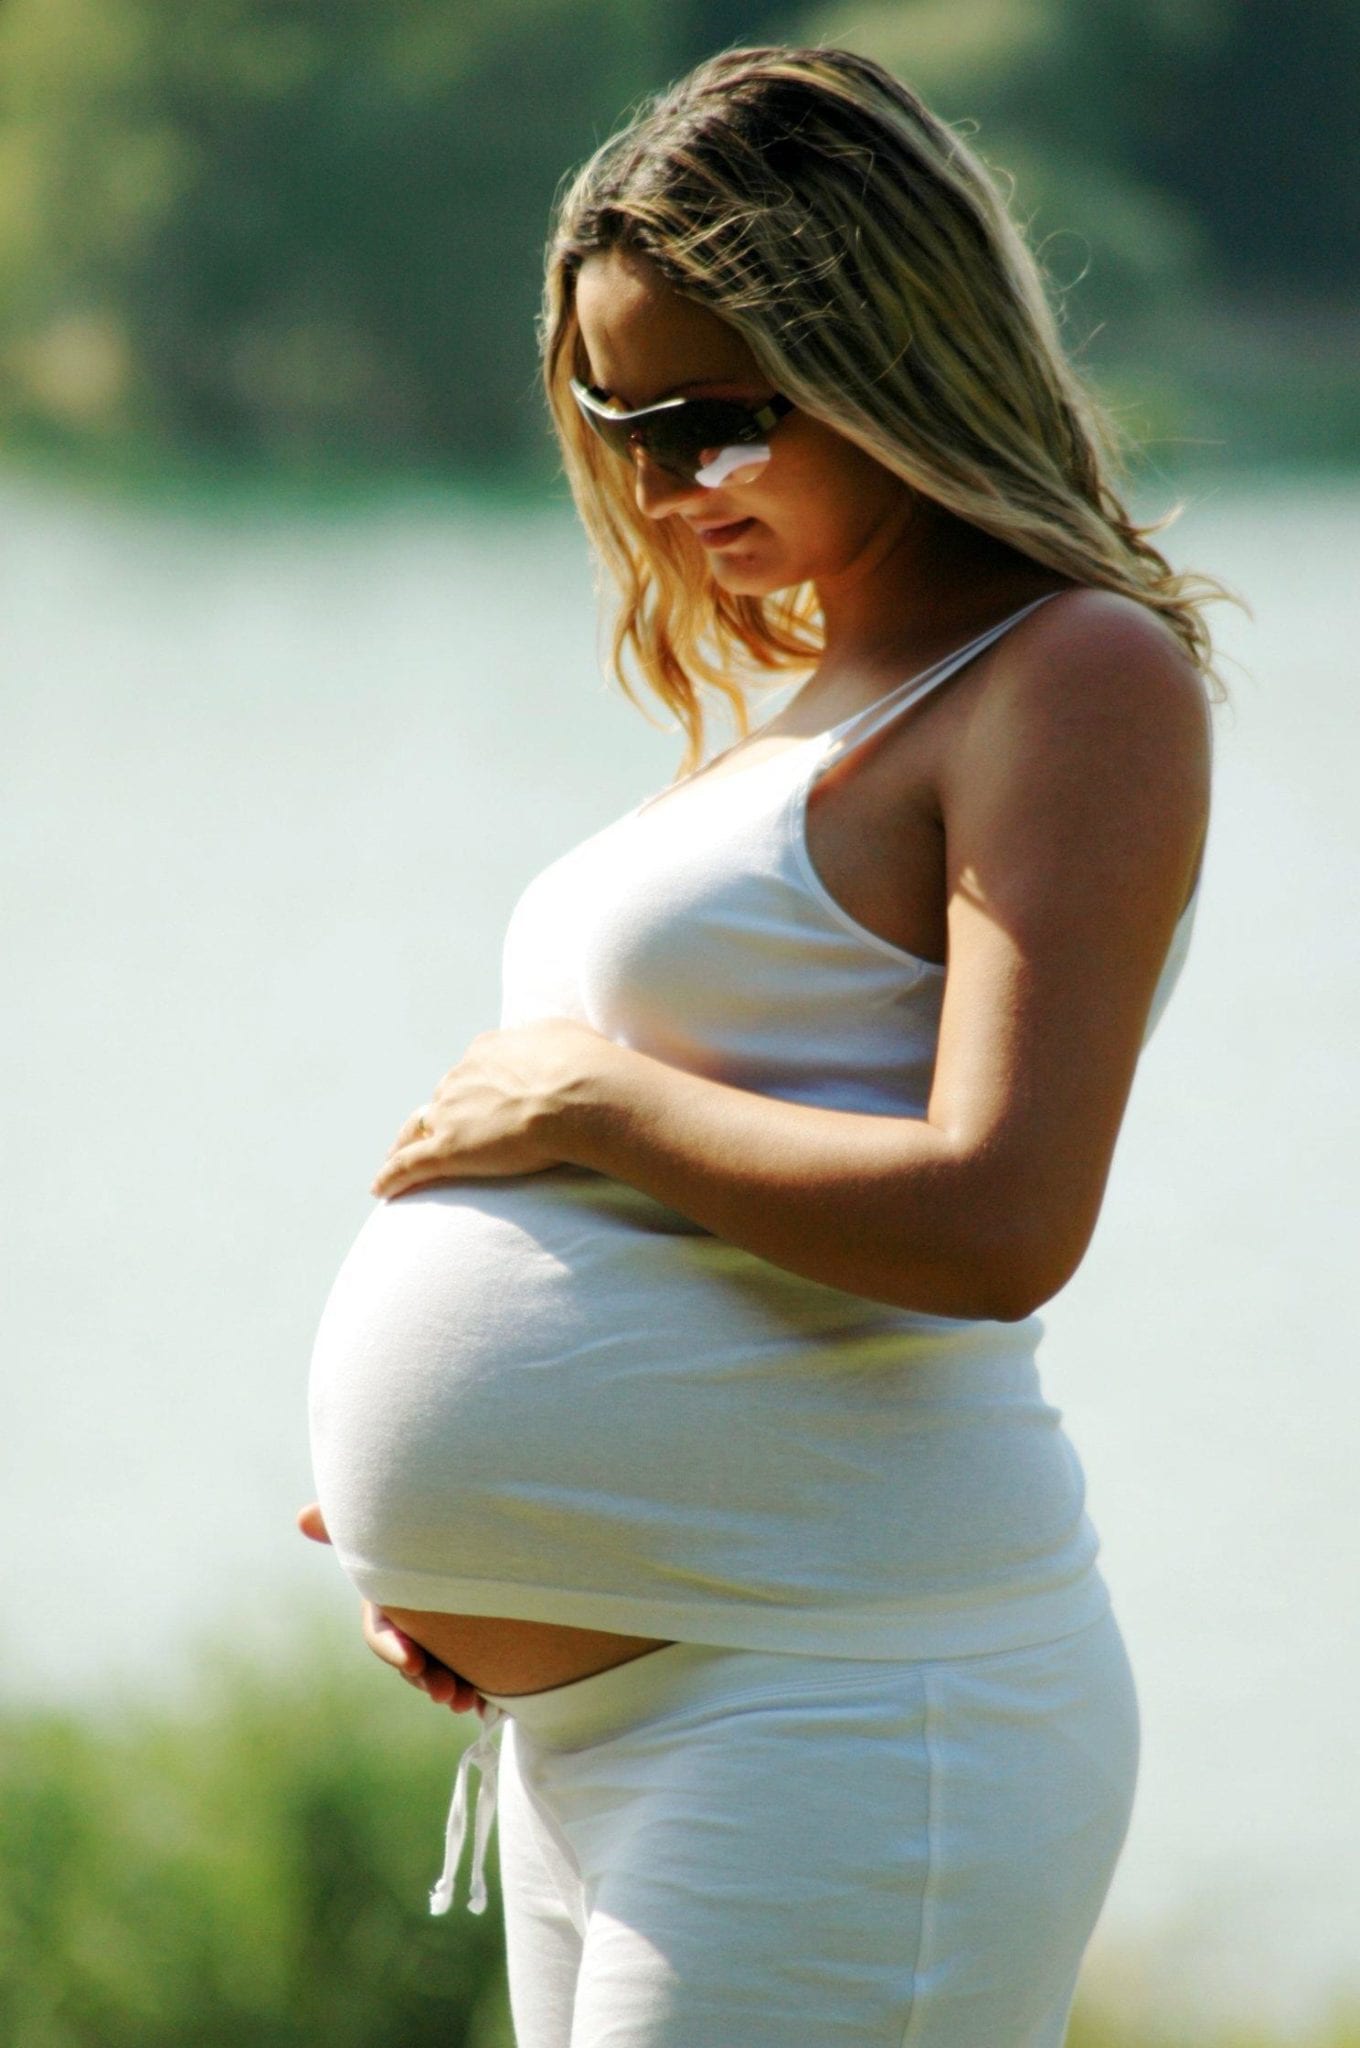 About Pregnancy Insurance Coverage